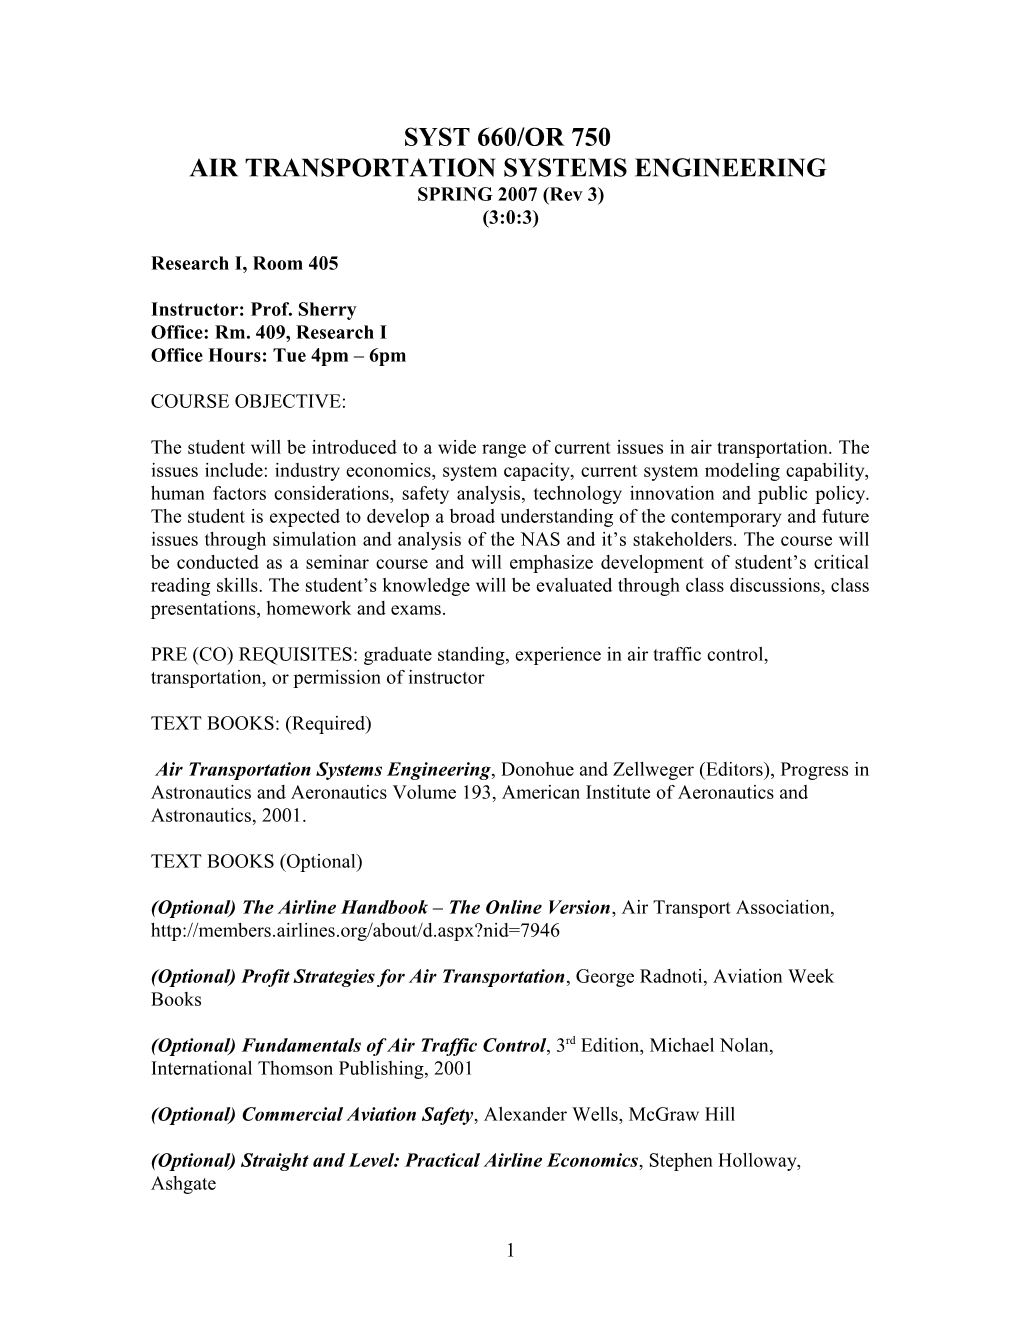 Syst 660/Or 660 Air Transportation Systems Engineering